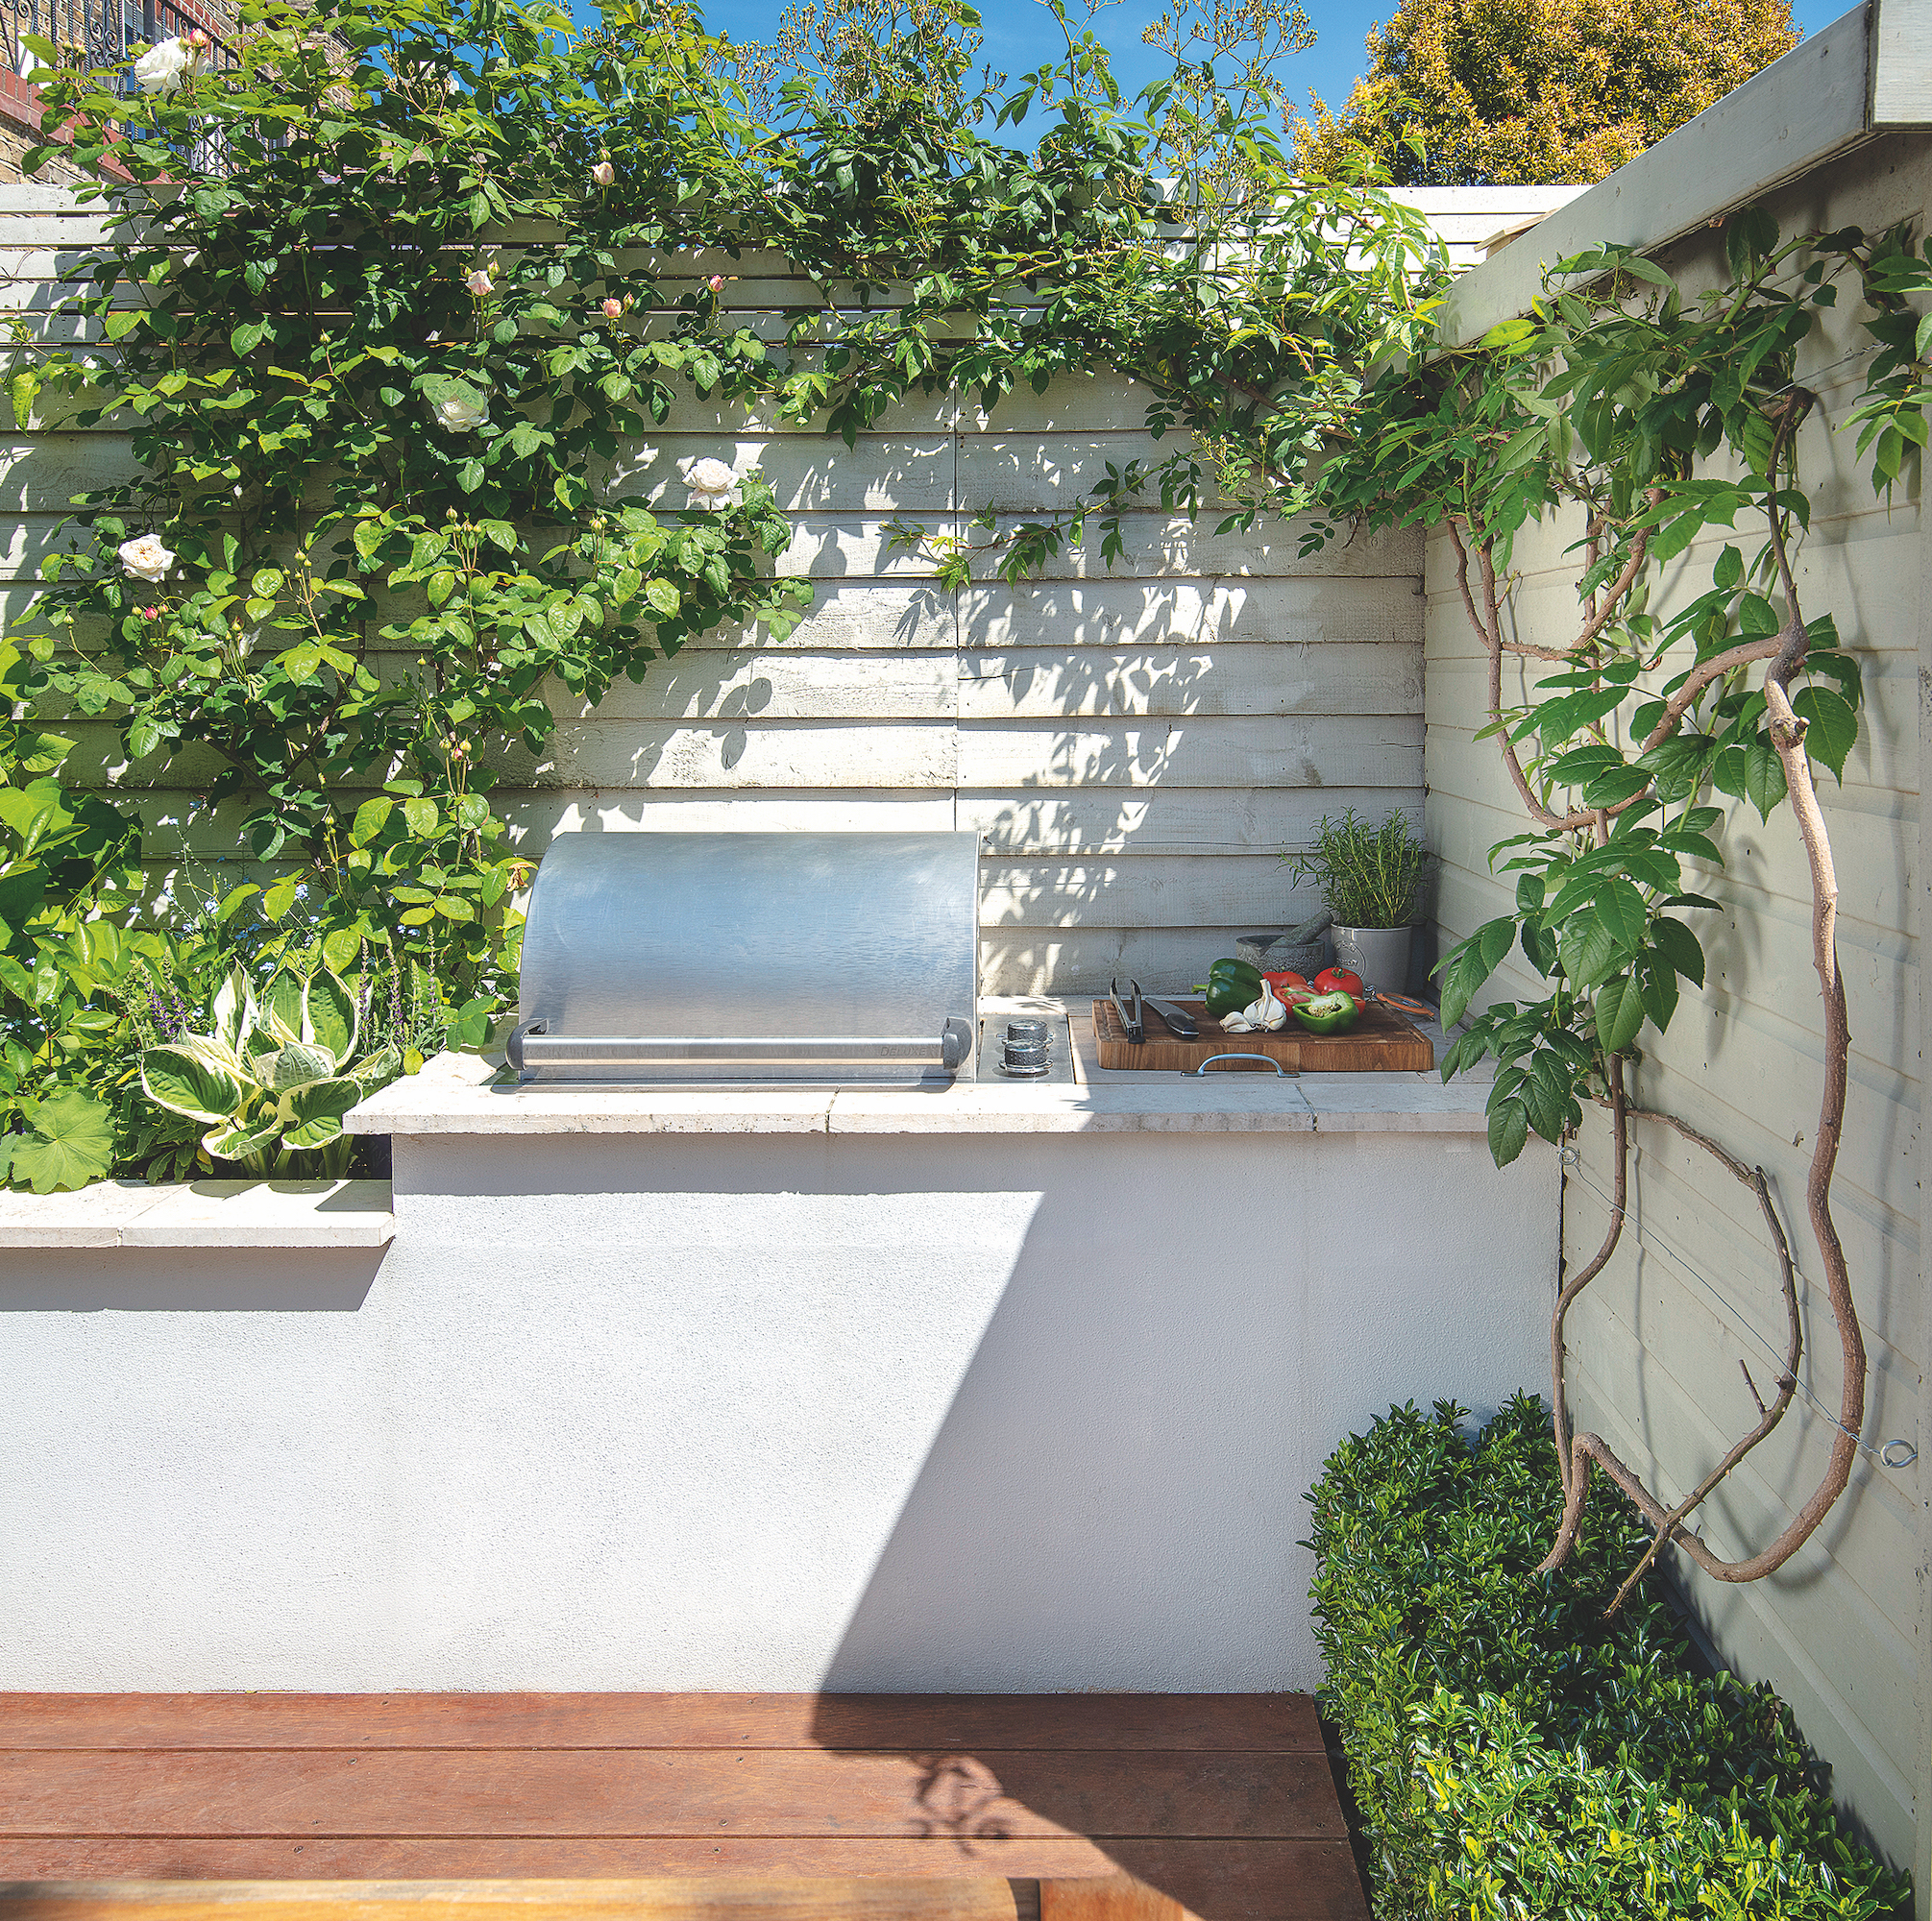 BBQ in corner of garden with white fencing and climbing plants